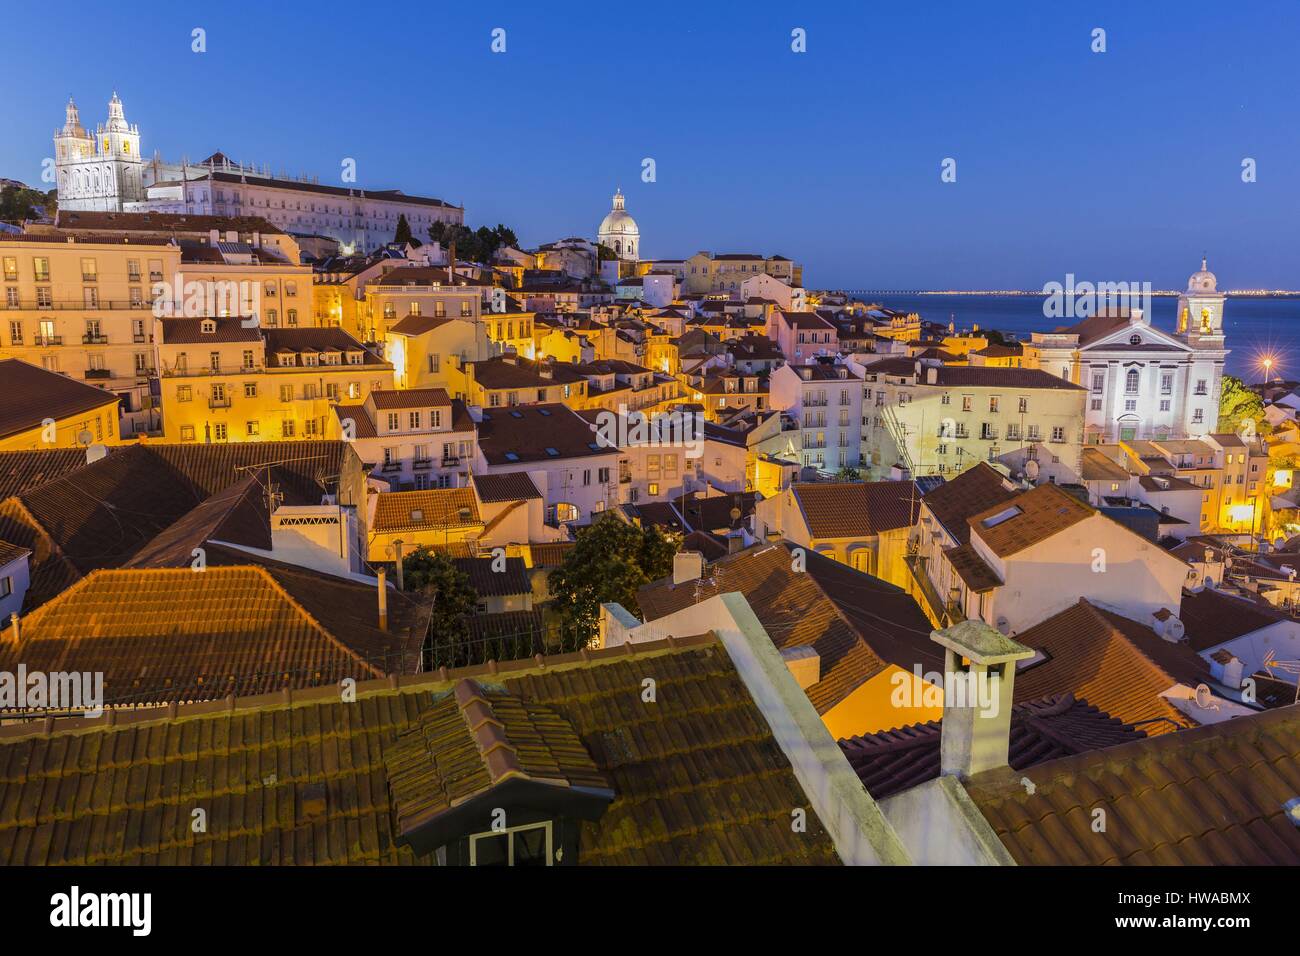 Portugal, Lisbon, district of Alfama, view of the monastery Sao Vicente, the church Santo Estevao and of the dome of the national Pantheon of Portugal Stock Photo